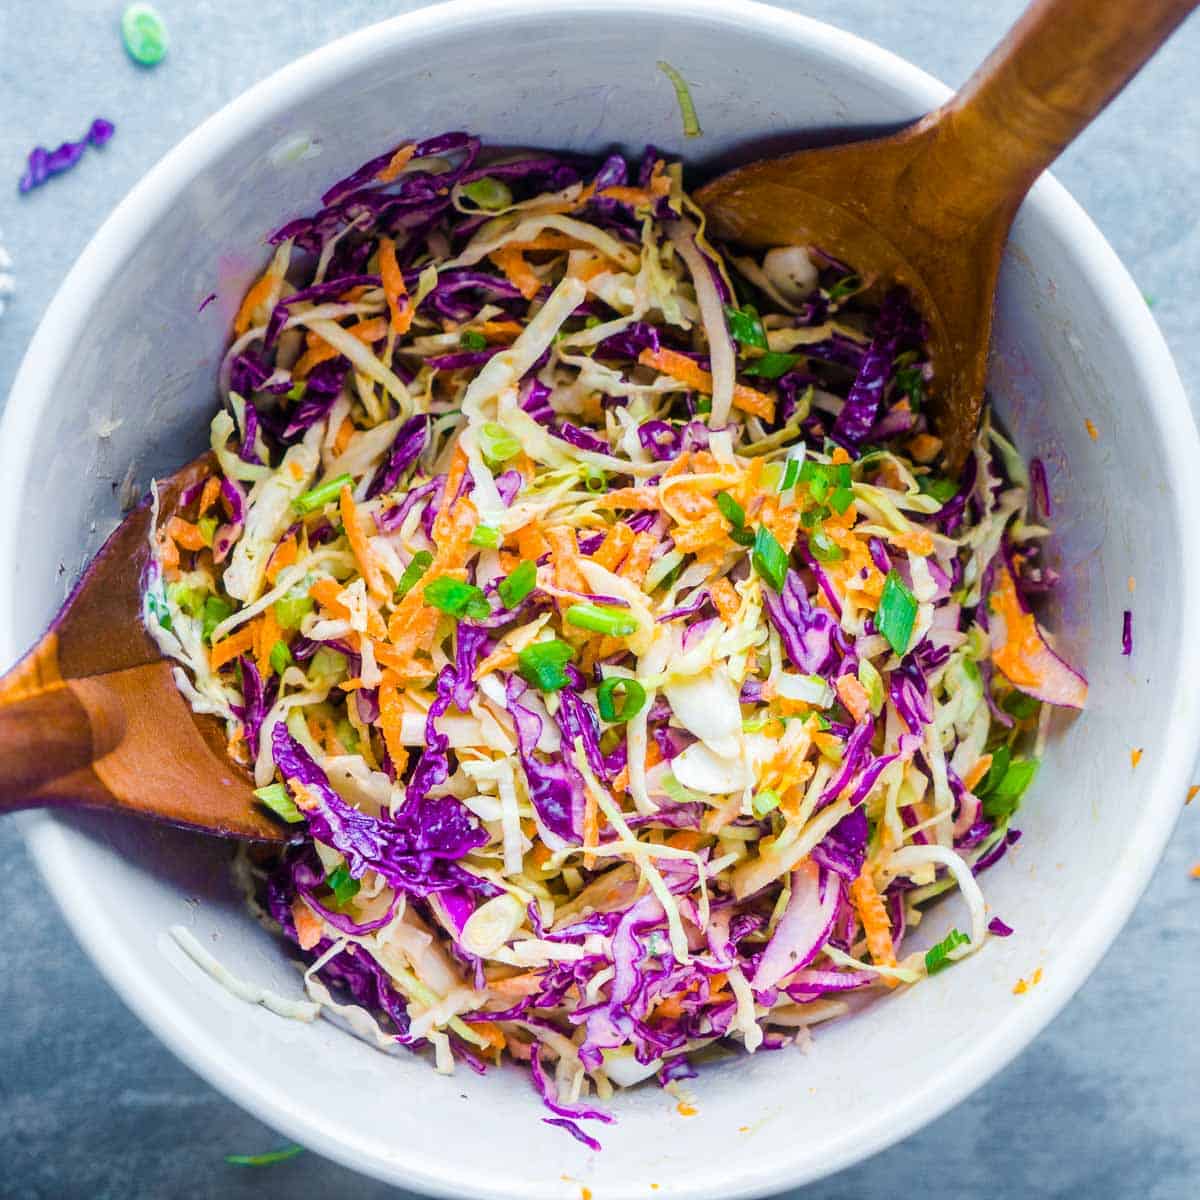 creamy coleslaw in white bowl with wood salad serving utensils